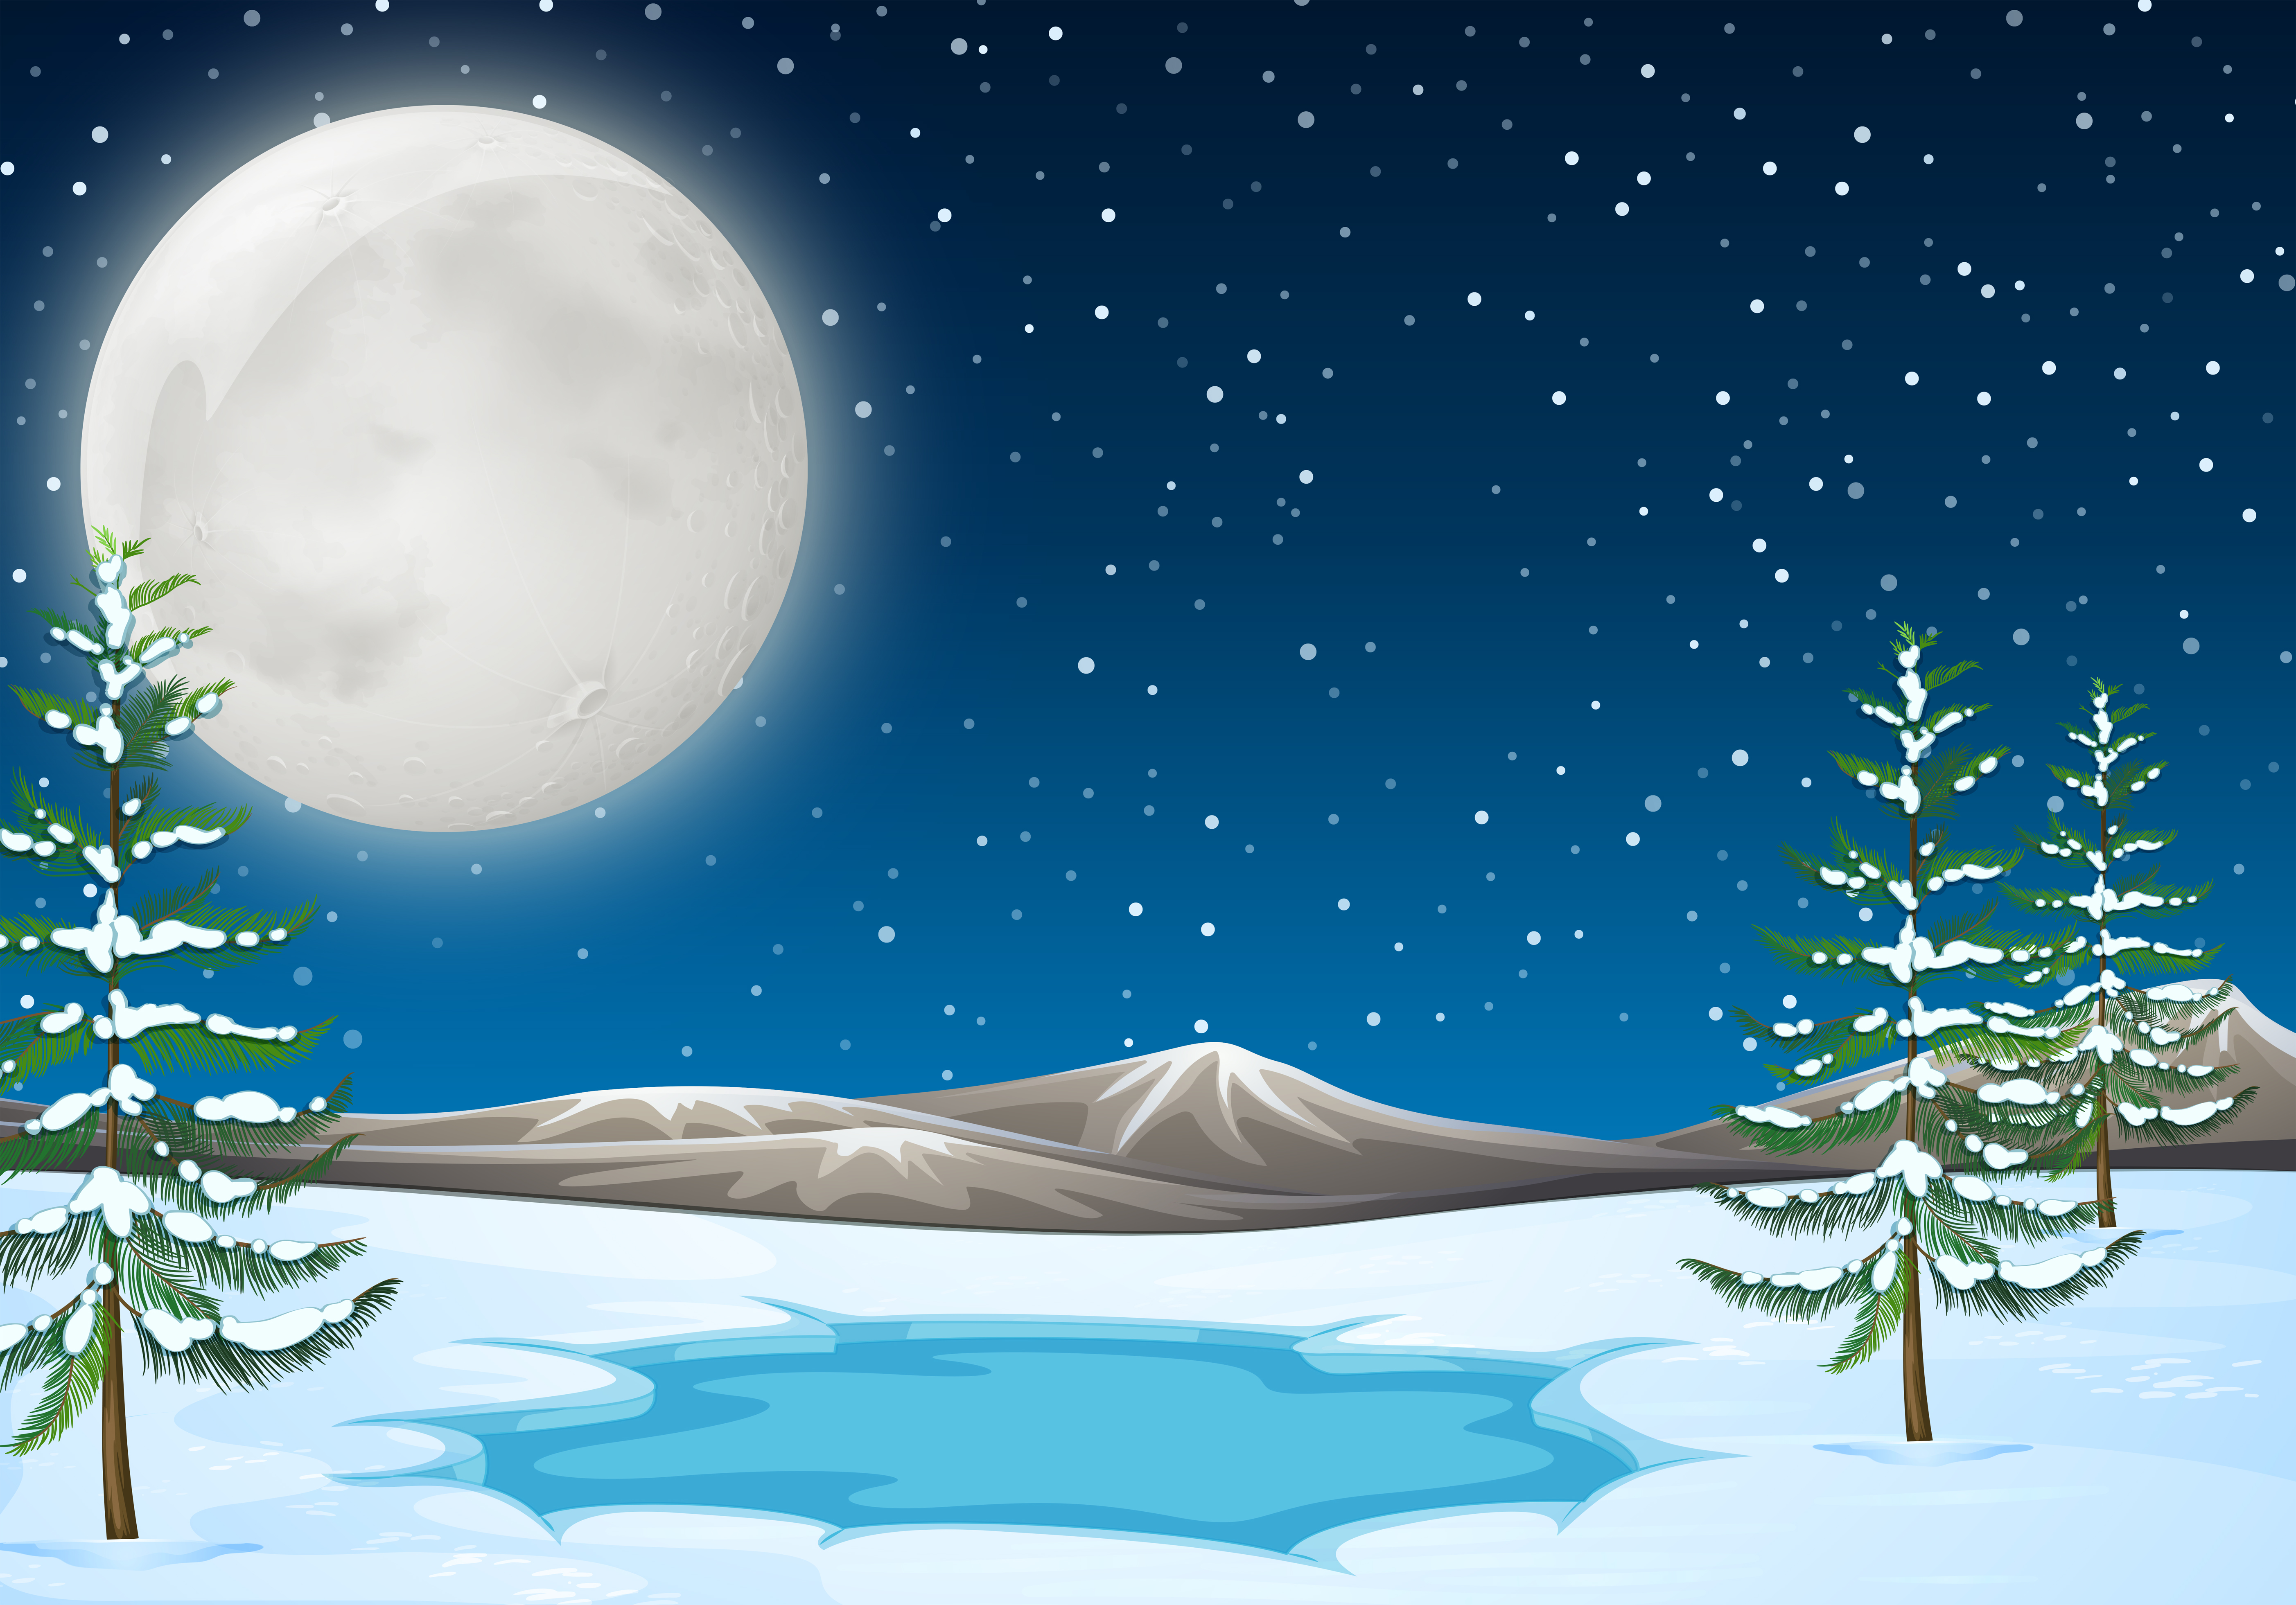 Download Snow Scene with pond - Download Free Vectors, Clipart ...